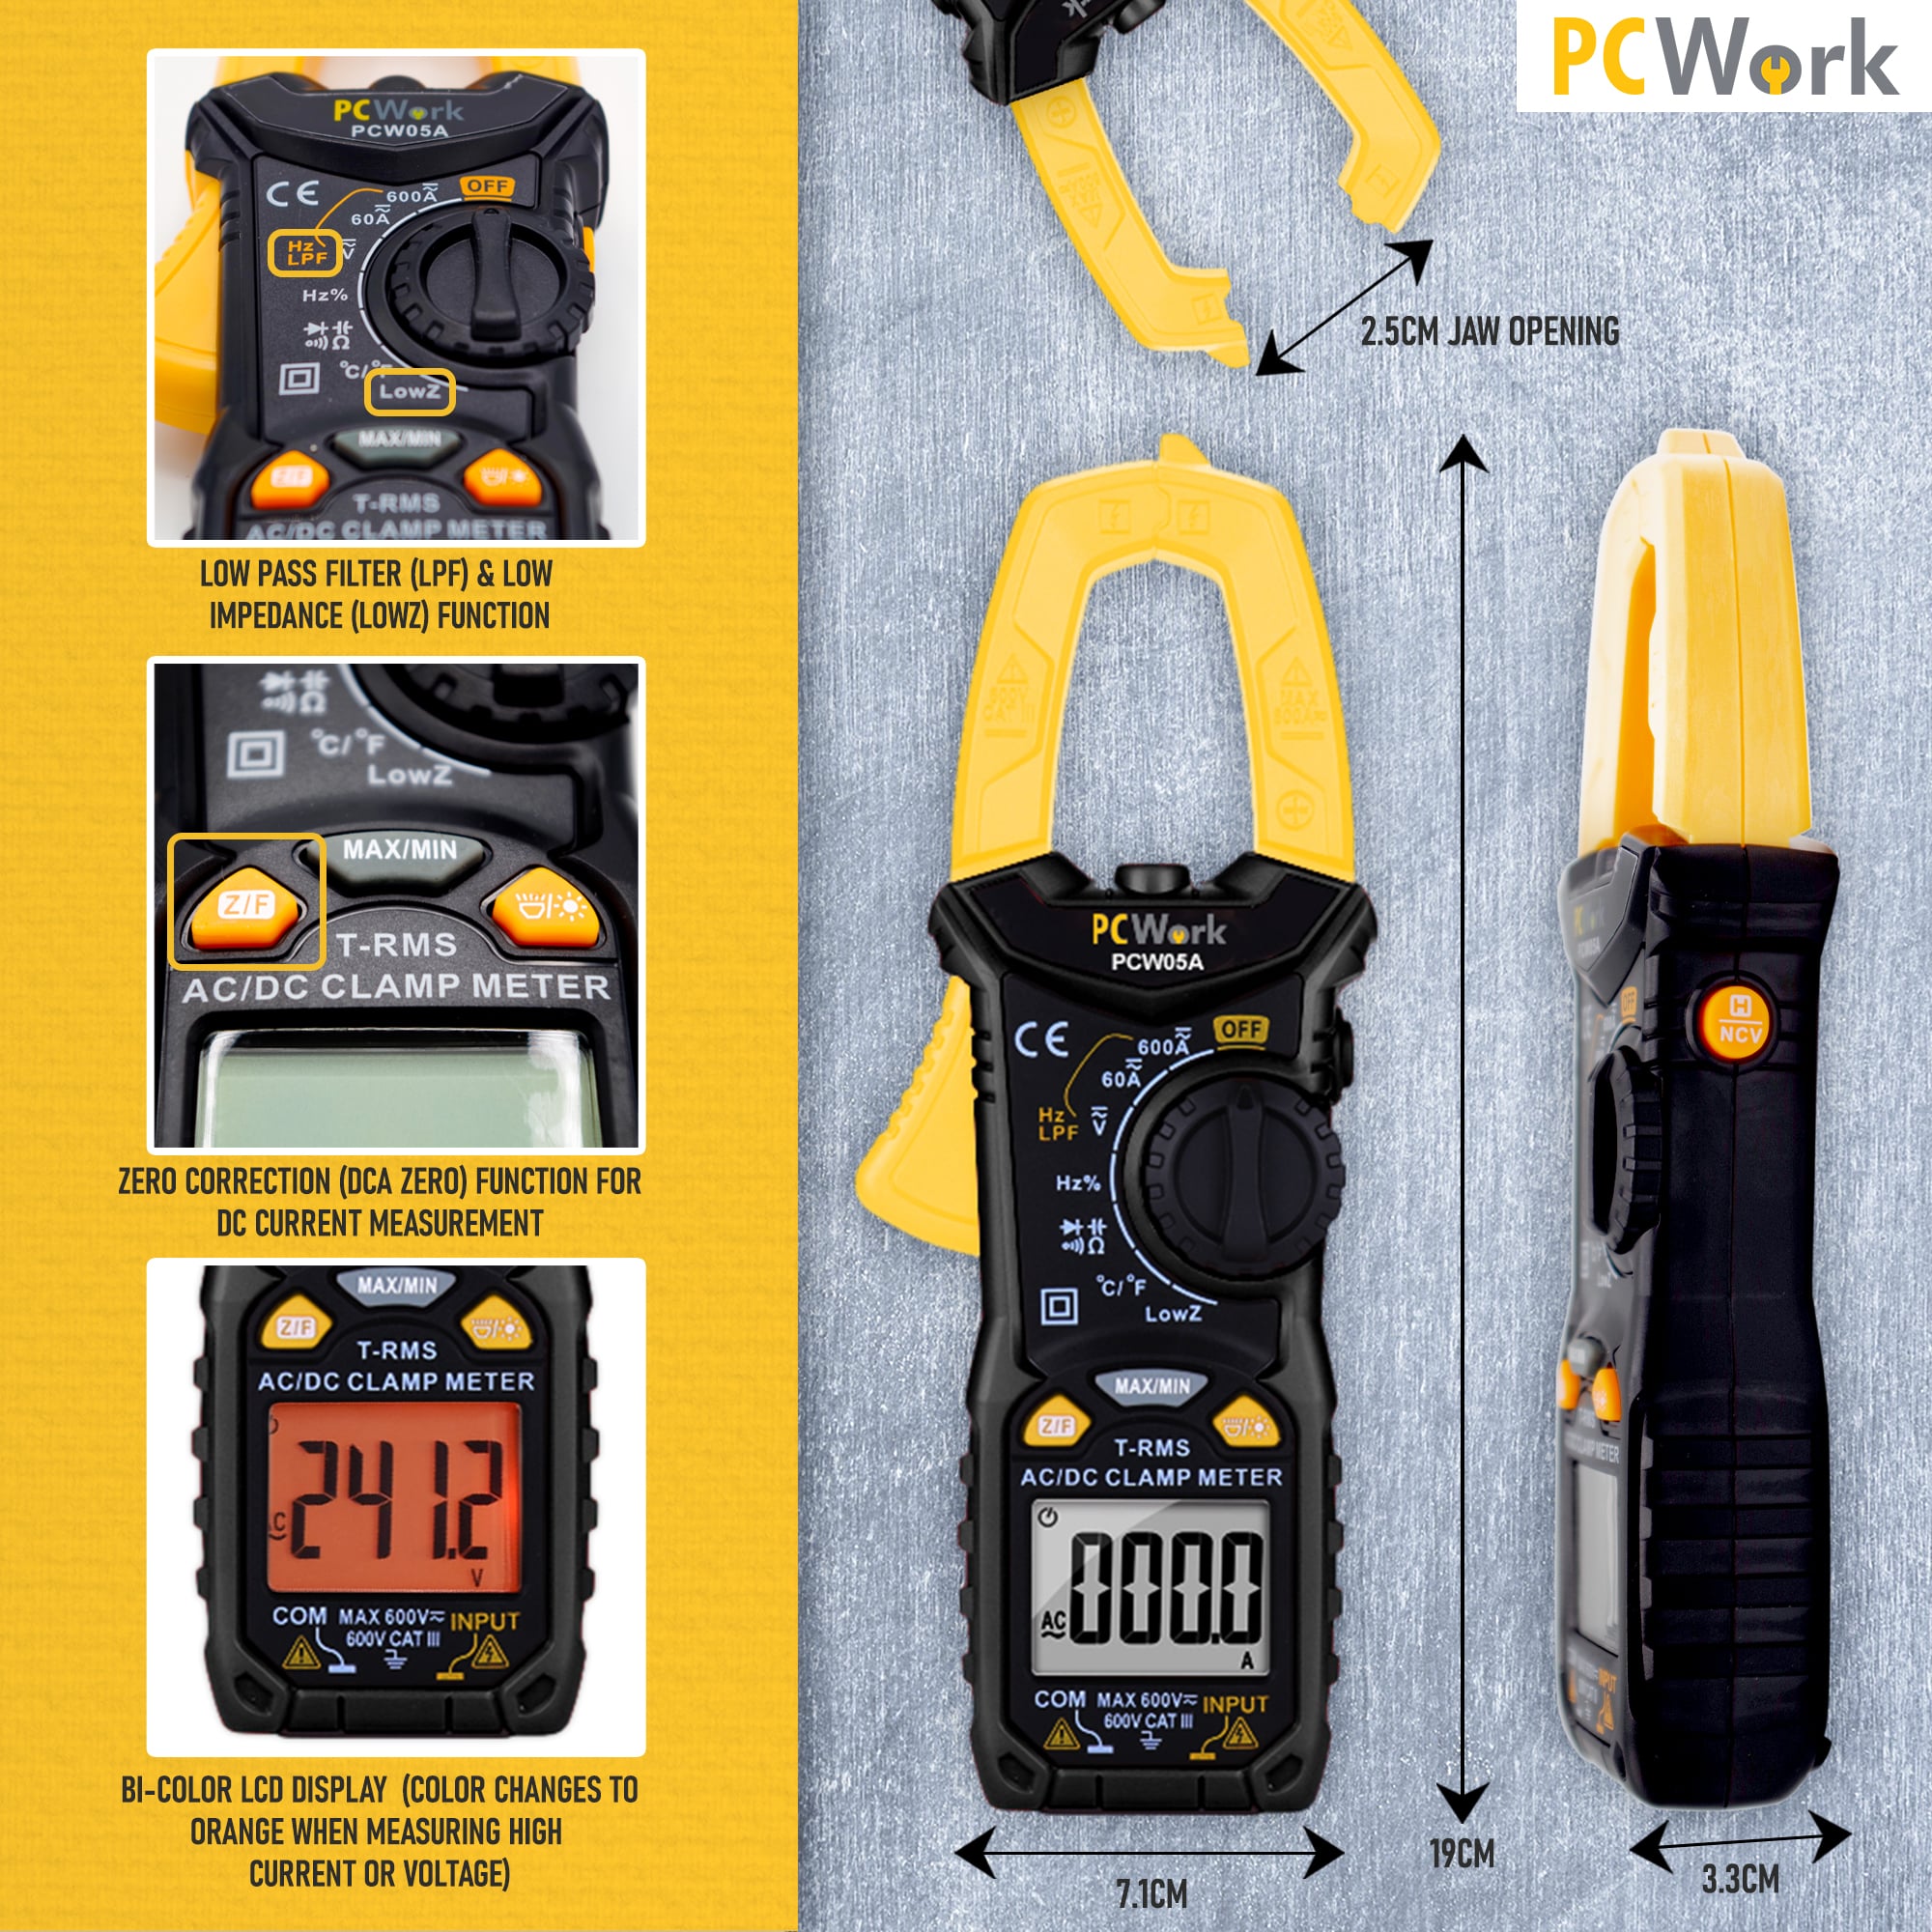 PCW05A clamp meter, digital, 600A, True RMS, 6000 counts